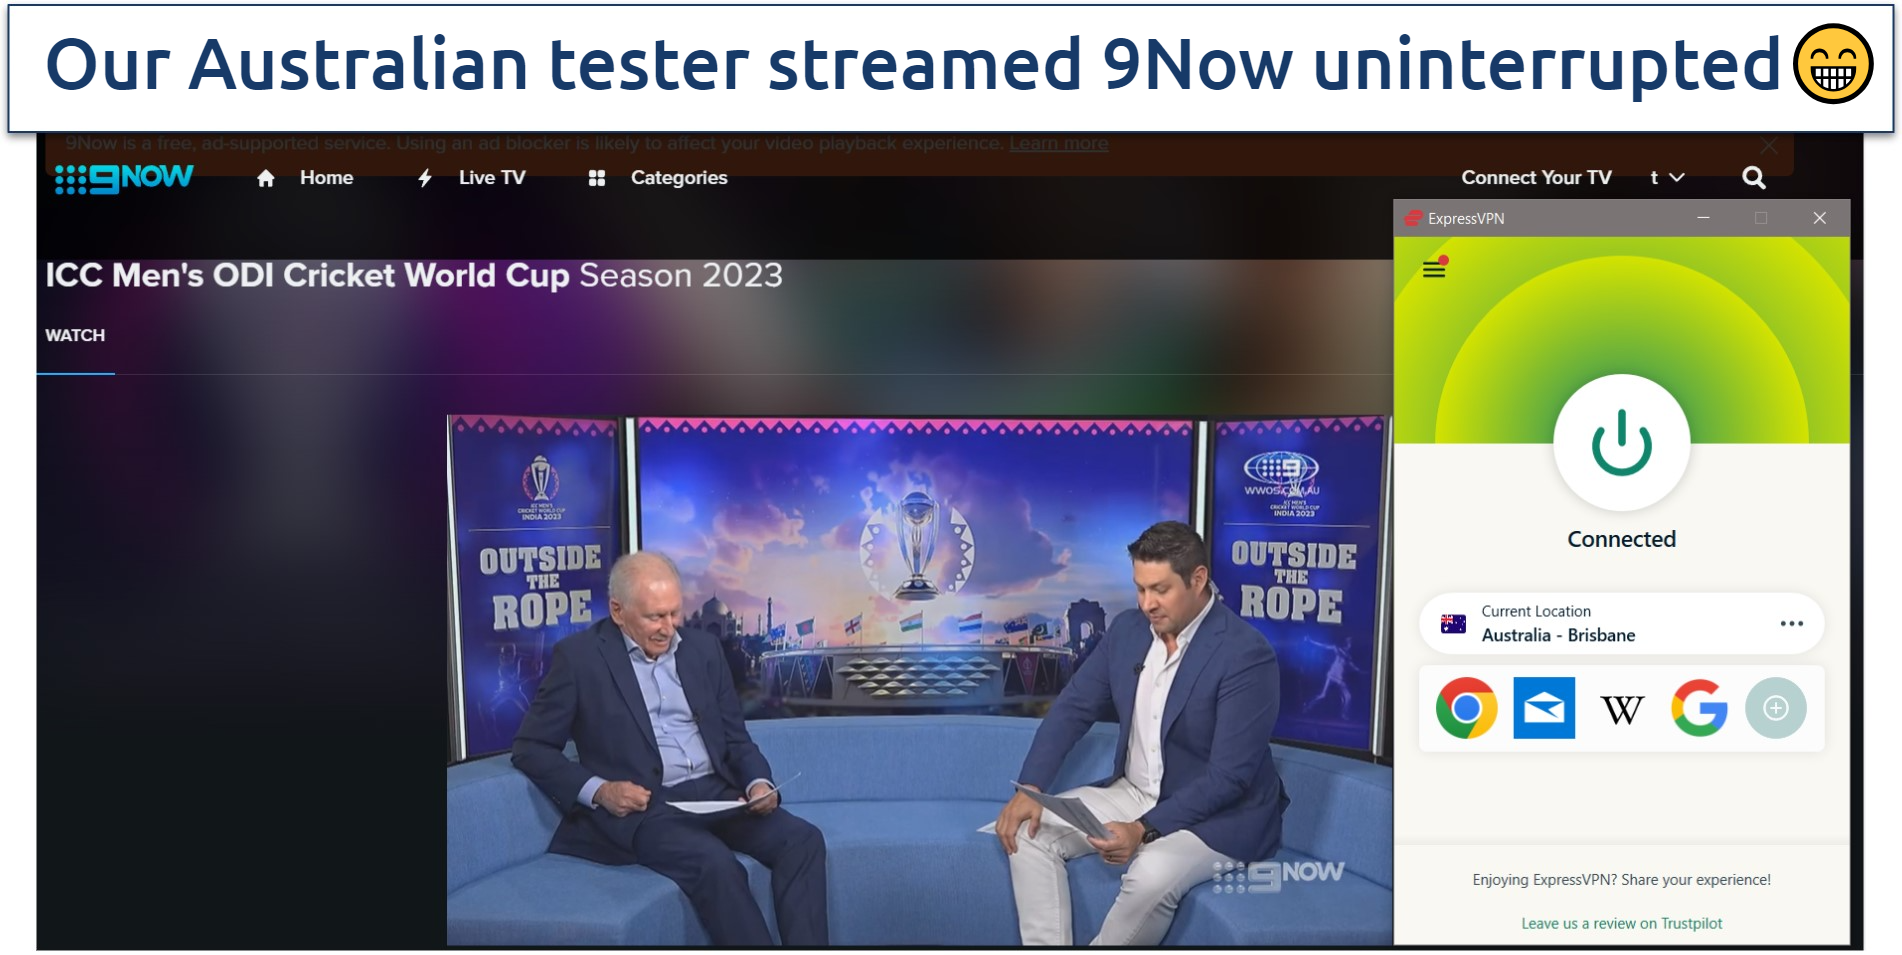 Screenshot of an ICC cricket video on 9Now, with ExpressVPN connected to Australia